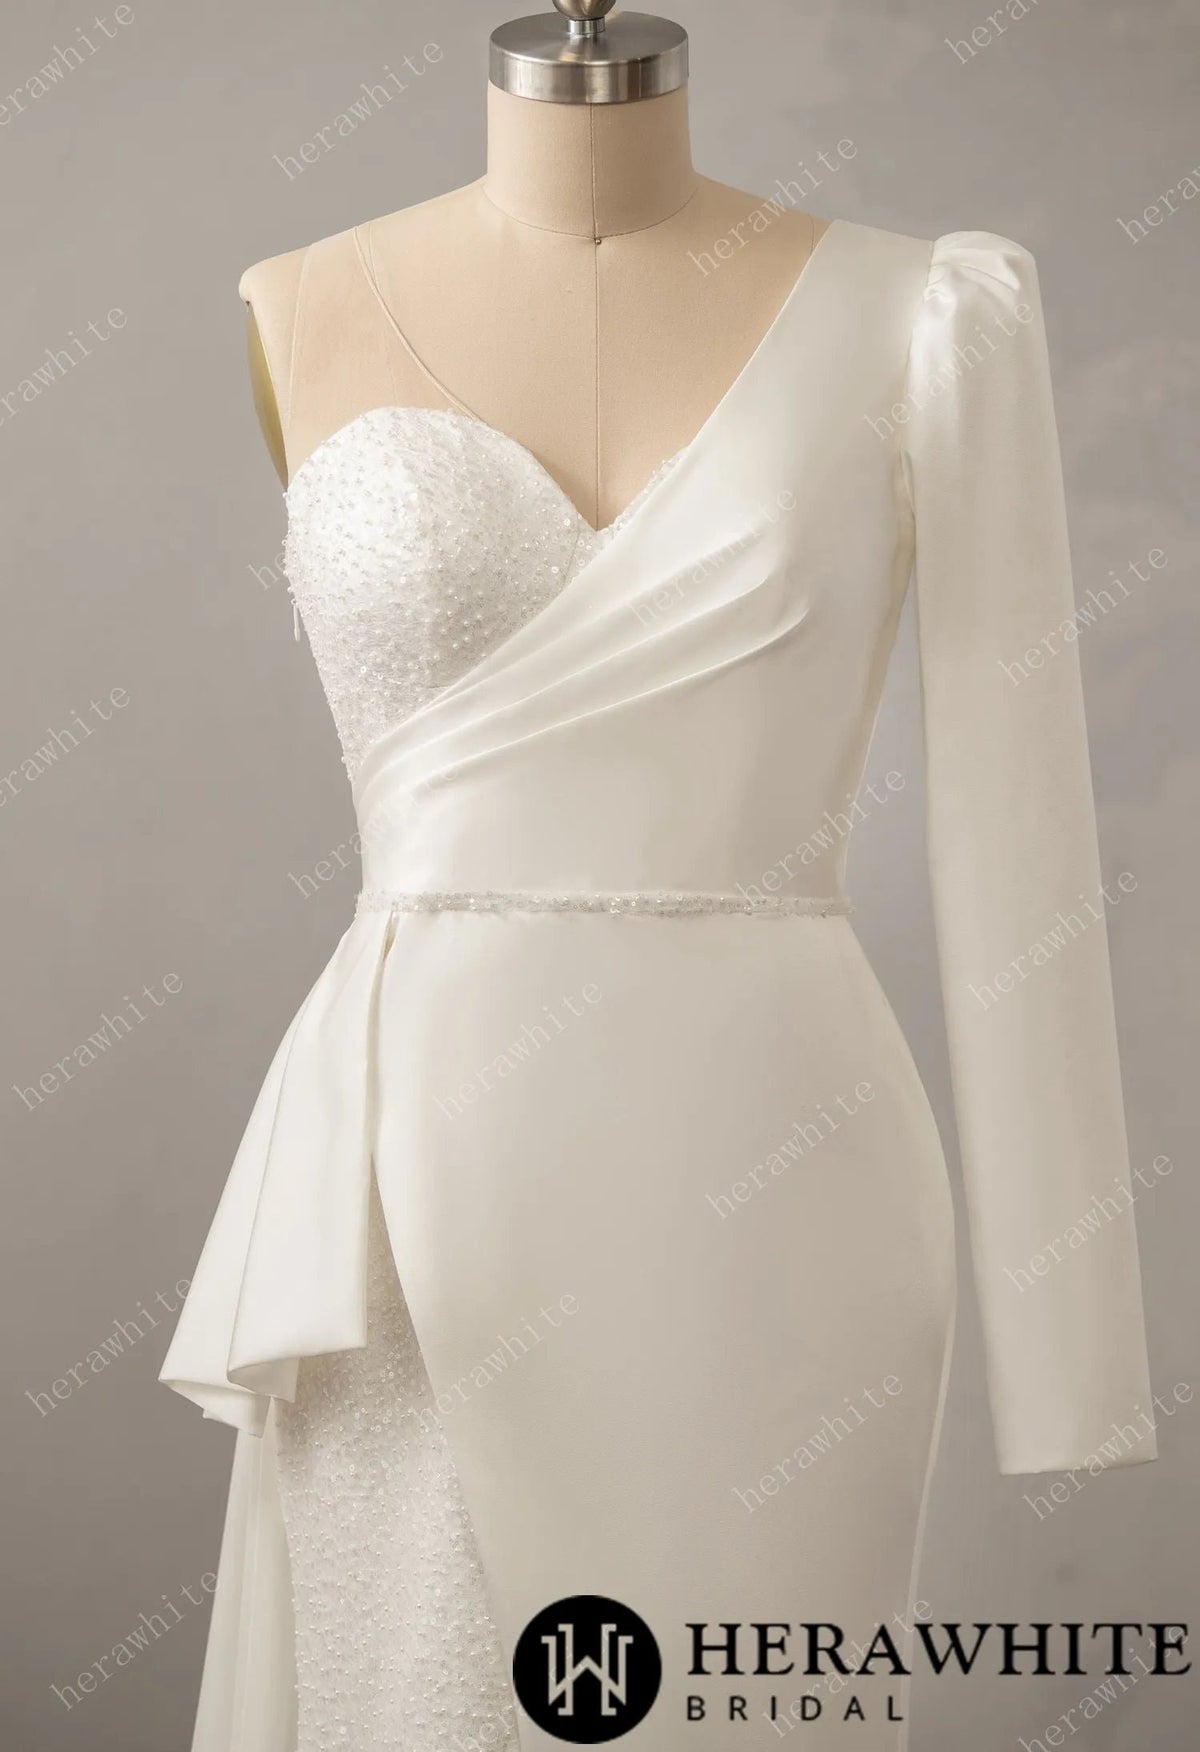 Modern Dress Soft Satin Fabric, Long Sleeve, One Shoulder, Wedding Dress Bridal Gown Sweetheart Neckline Beaded Illusion Back Fit and Flare